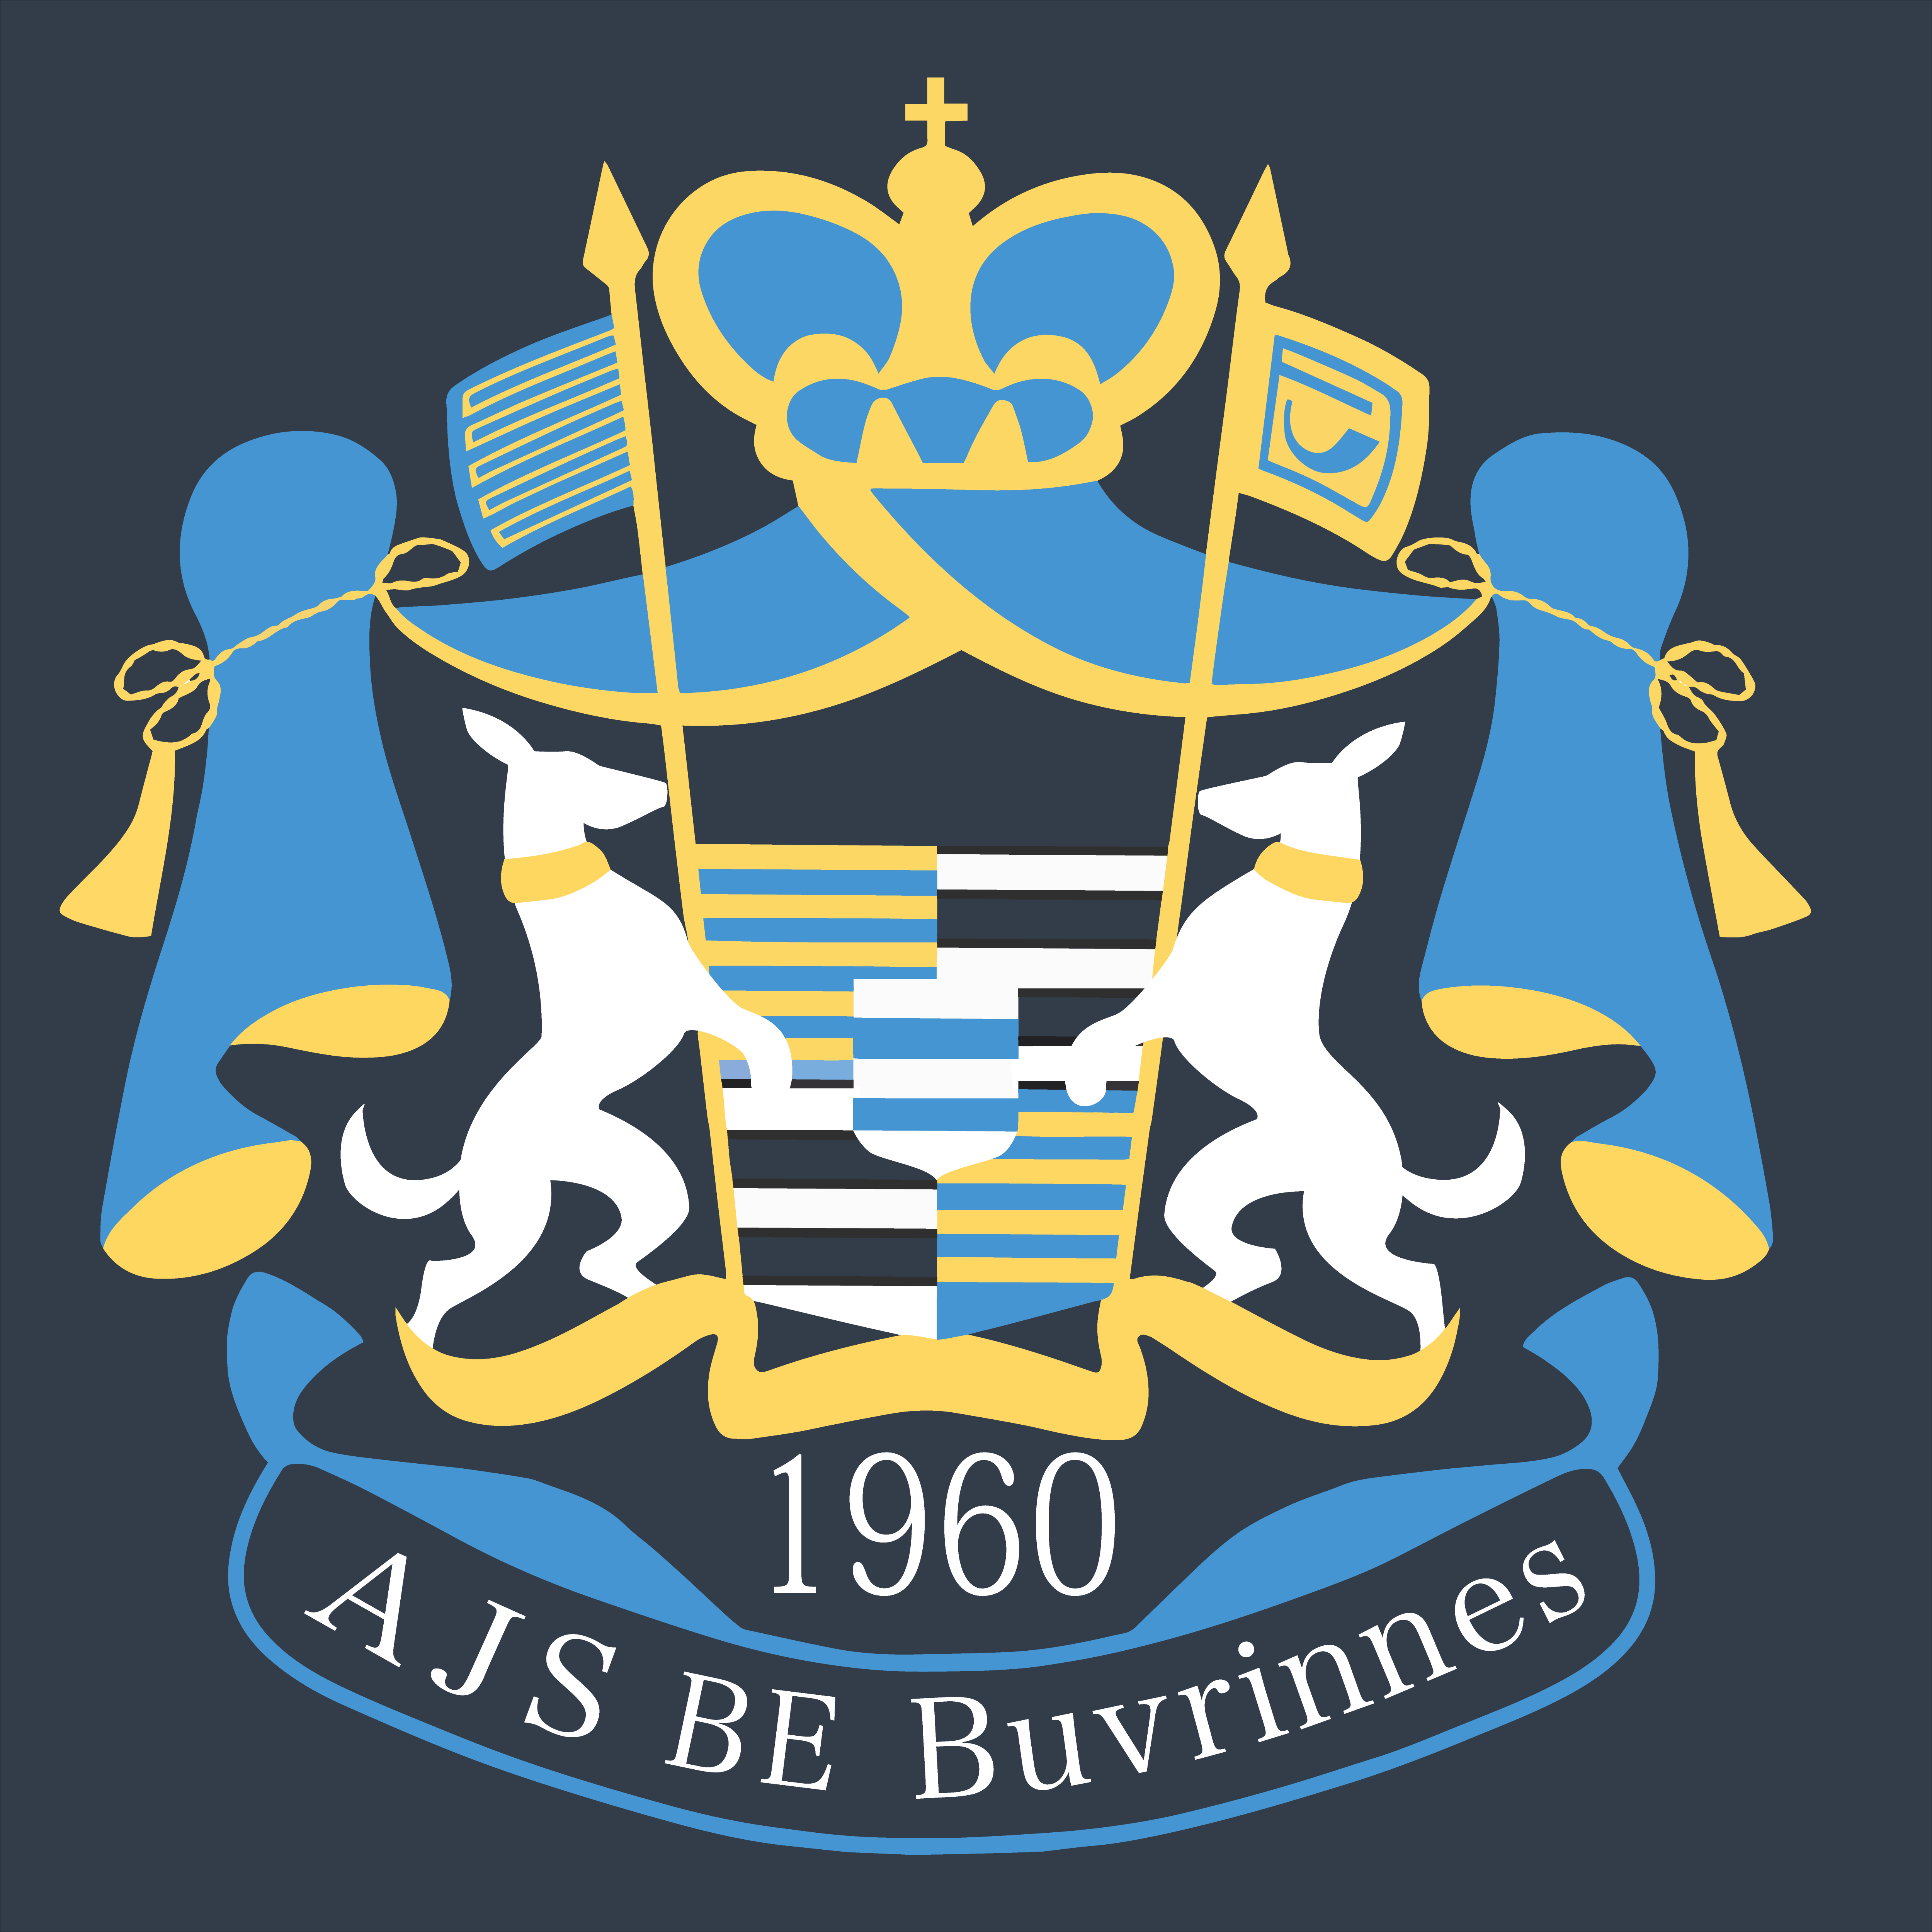 AJS-Buvrinnes